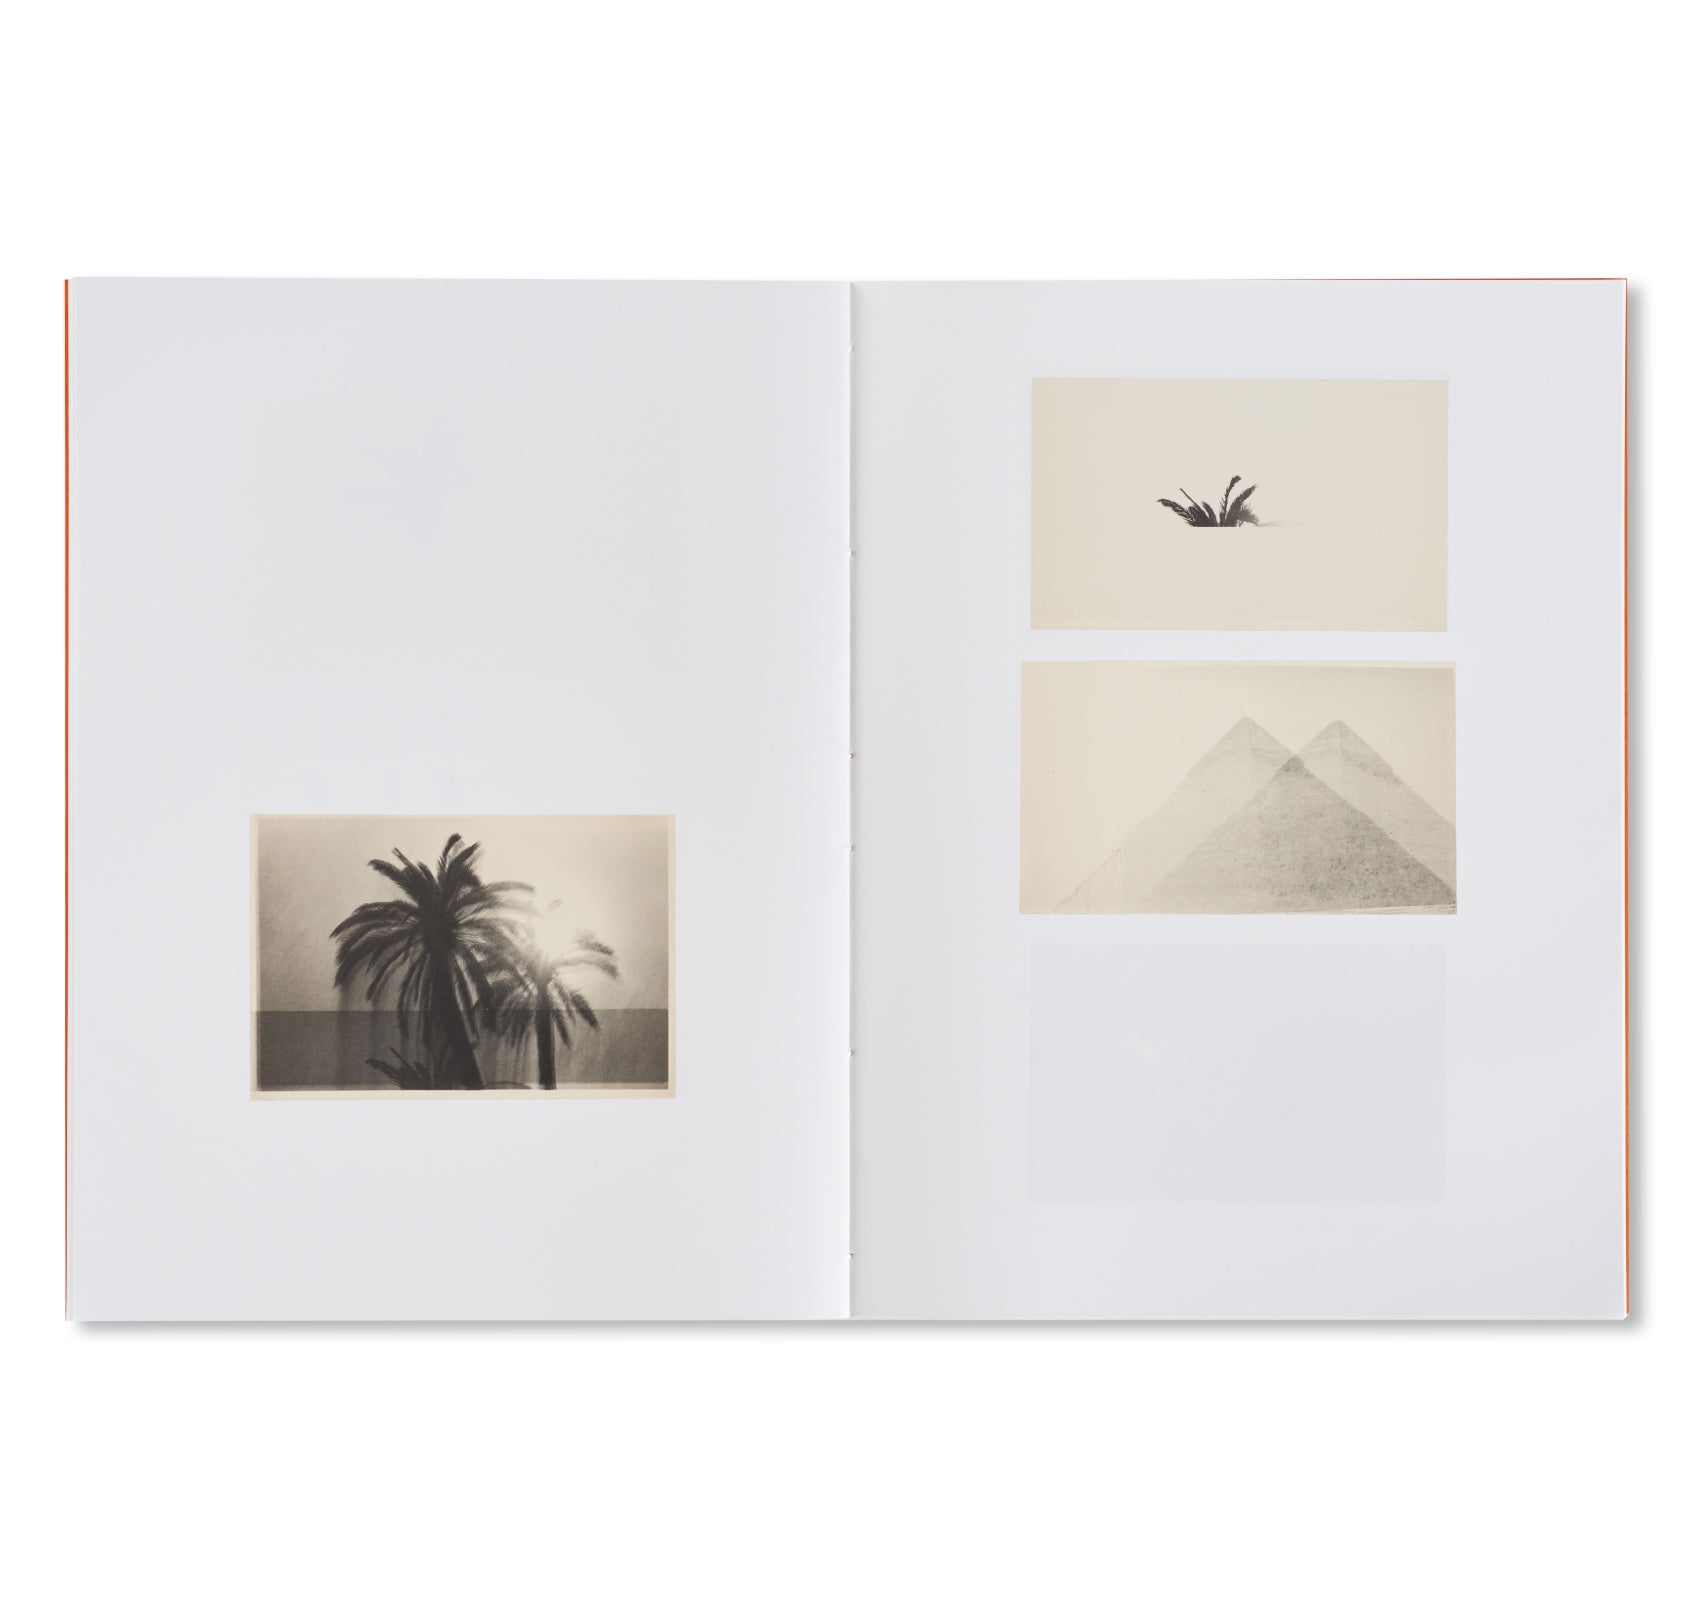 THE PYRAMIDS AND PALM TREES TEST by Bruno V. Roels [SPECIAL EDITION]